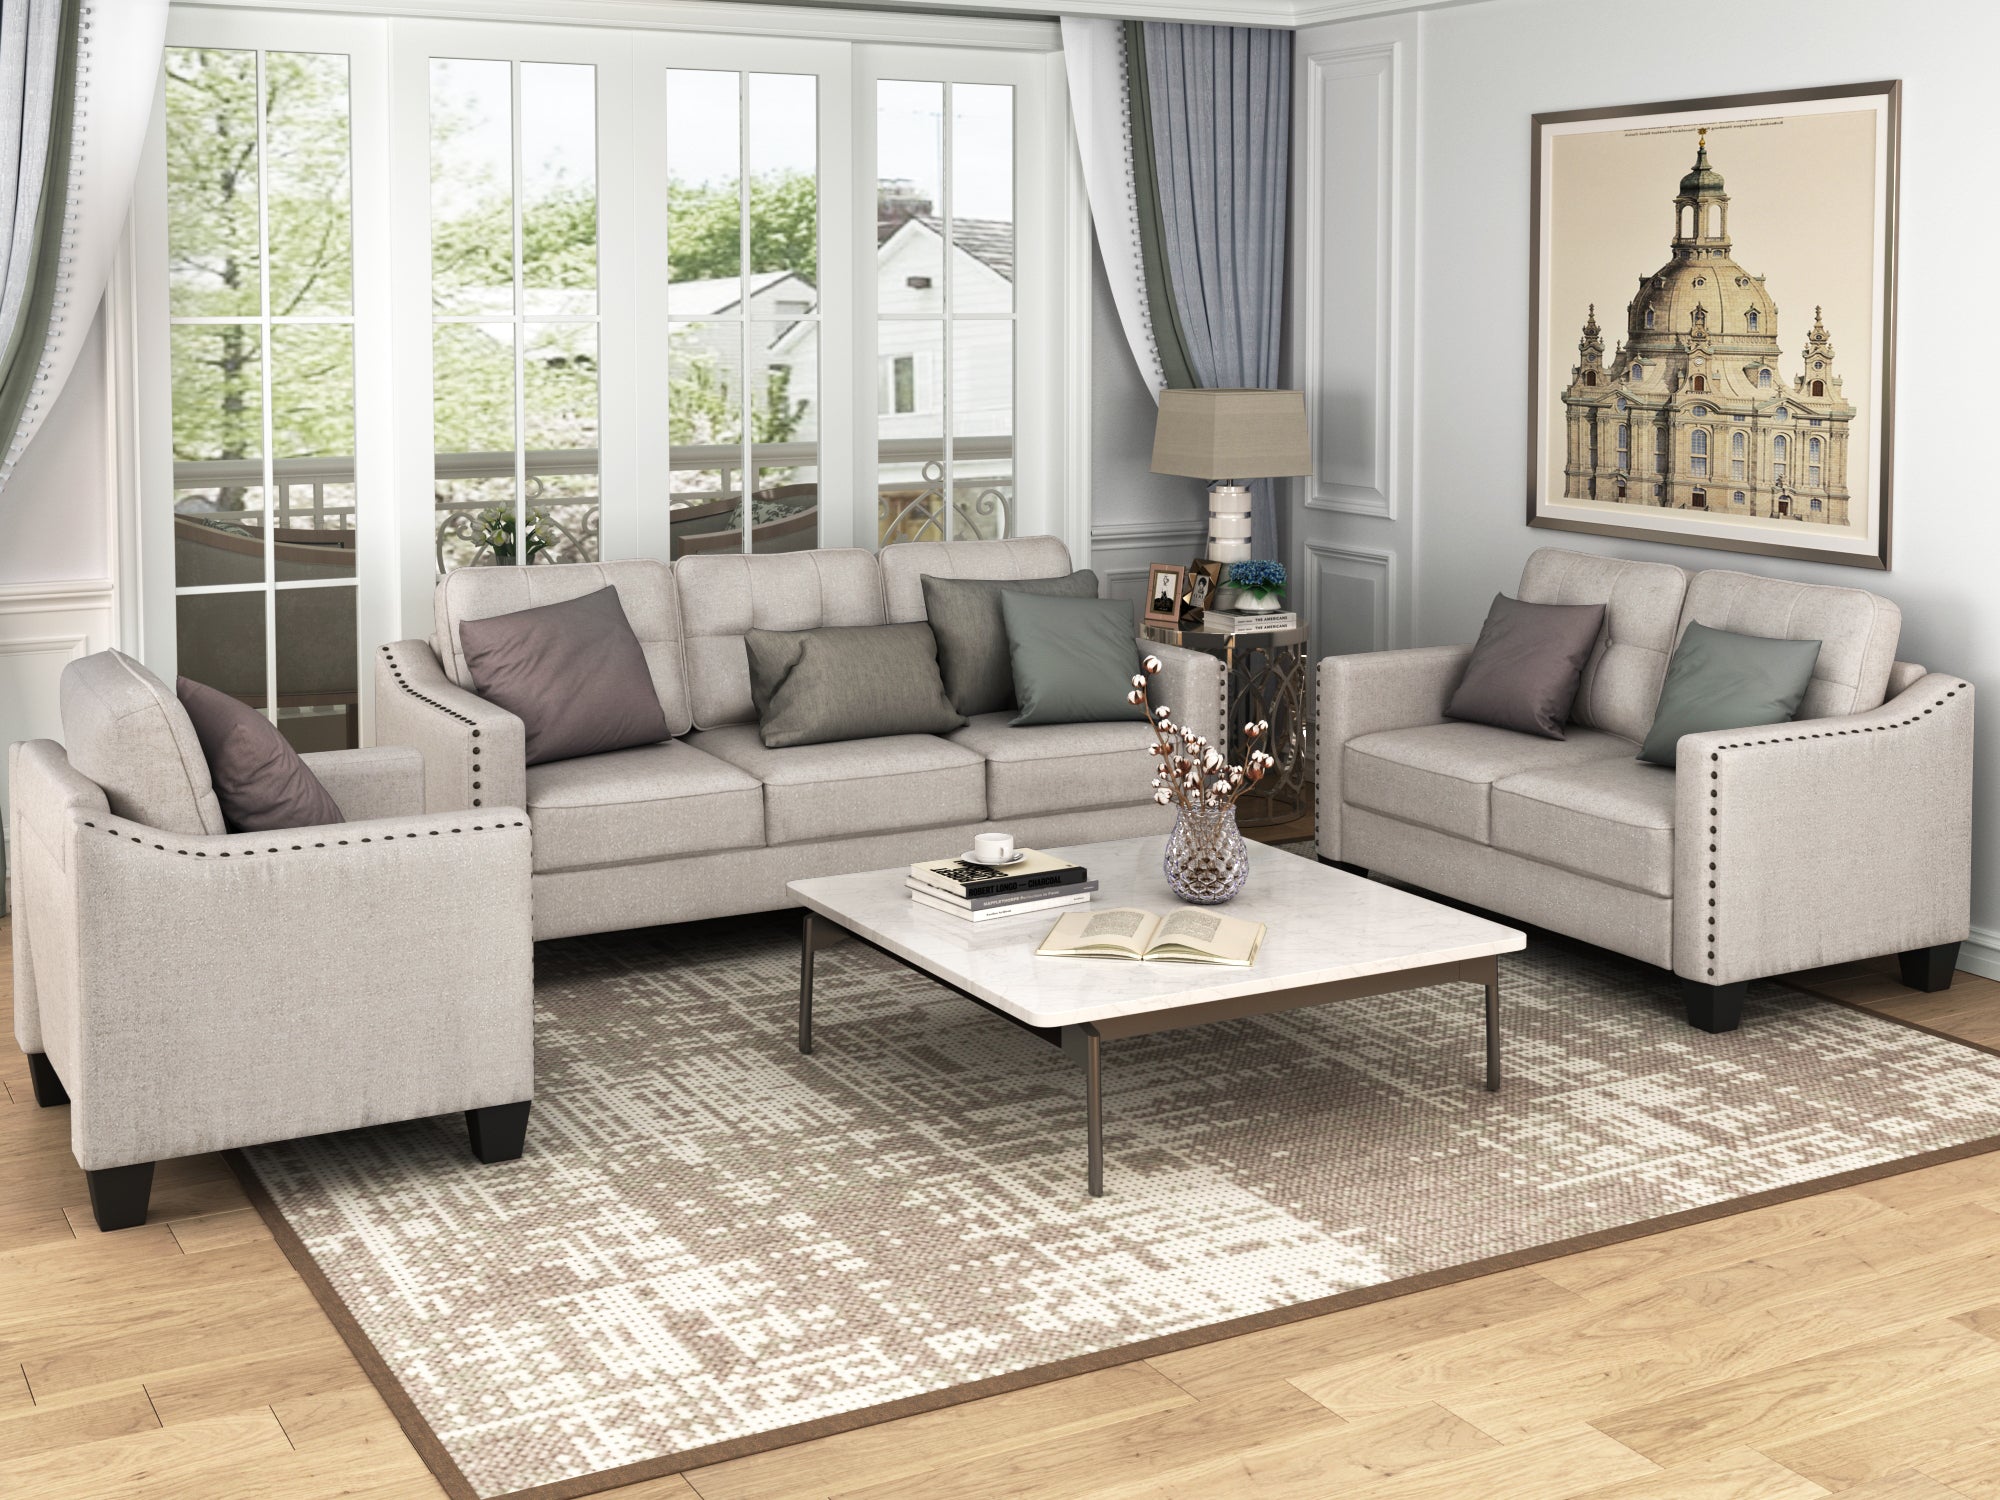 U-Style 3-Piece Living Room Set in Beige: Sofa, Loveseat, Armchair | Stylish and Comfortable Addition to Your Home